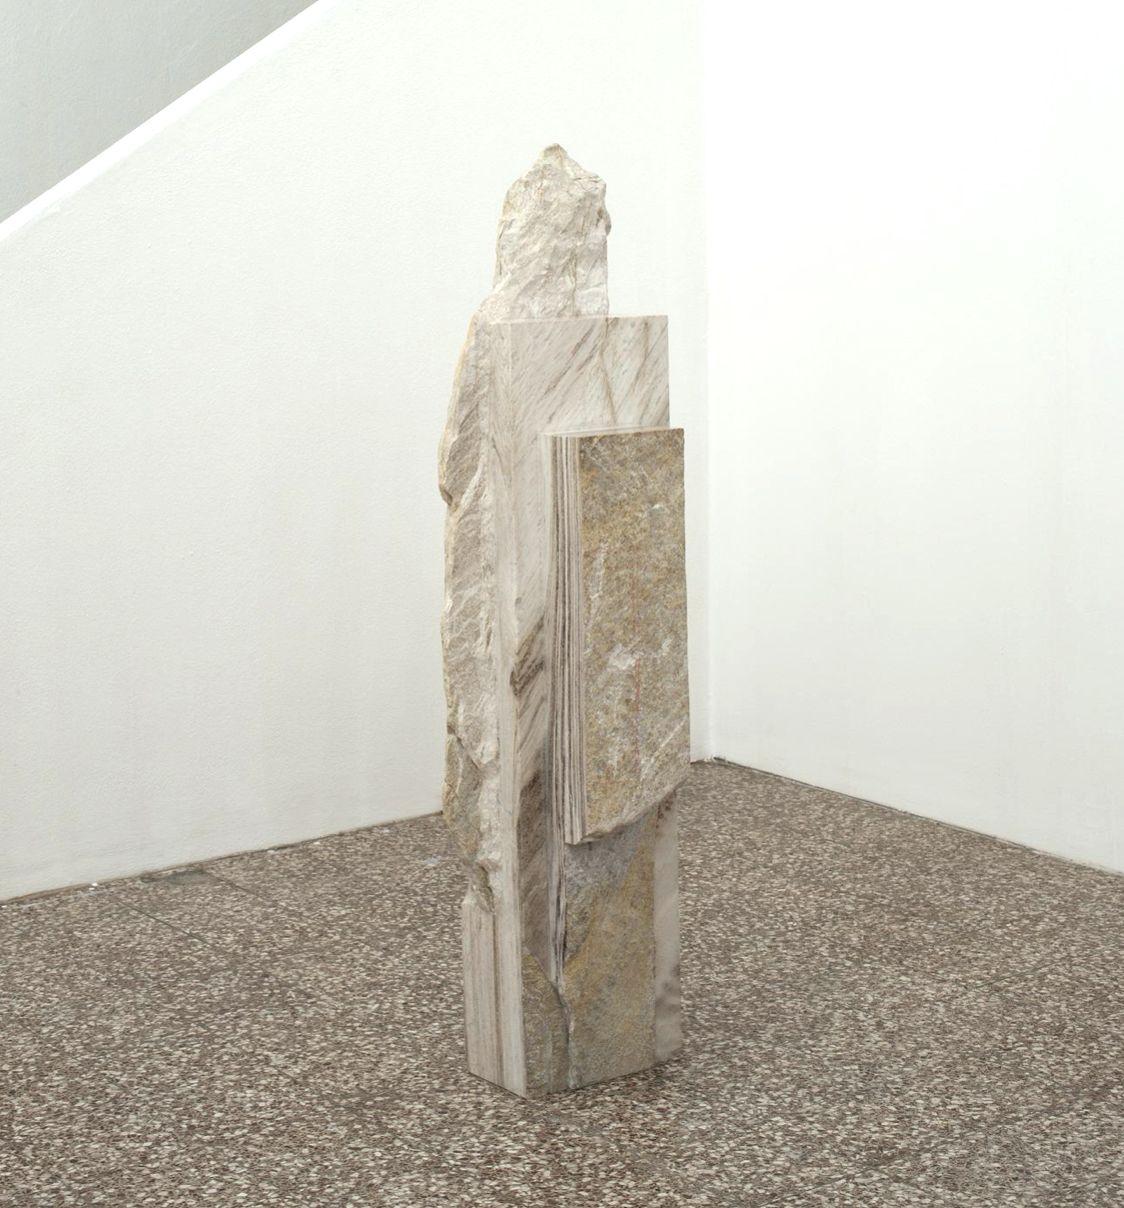 Untitled II, Palissandro is a unique sculpture by contemporary artist Mattia Bosco. This sculpture is made of Palissandro marble, dimensions are 142 × 46 × 35 cm (55.9 × 18.1 × 13.8 in). 

The process used by the artist is significantly different